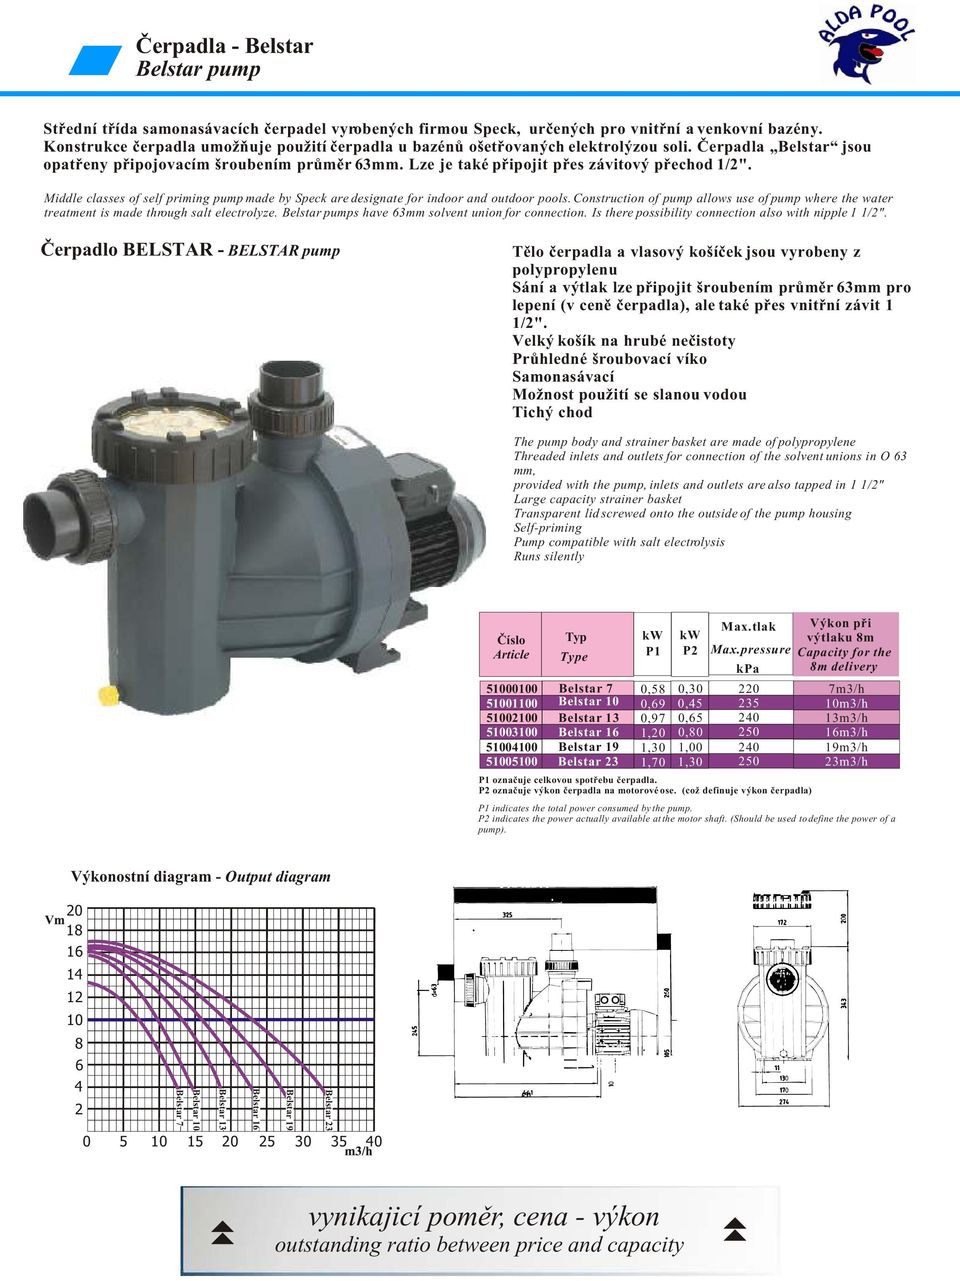 Middle classes of self priming pump made by Speck are designate for indoor and outdoor pools. Construction of pump allows use of pump where the water treatment is made through salt electrolyze.